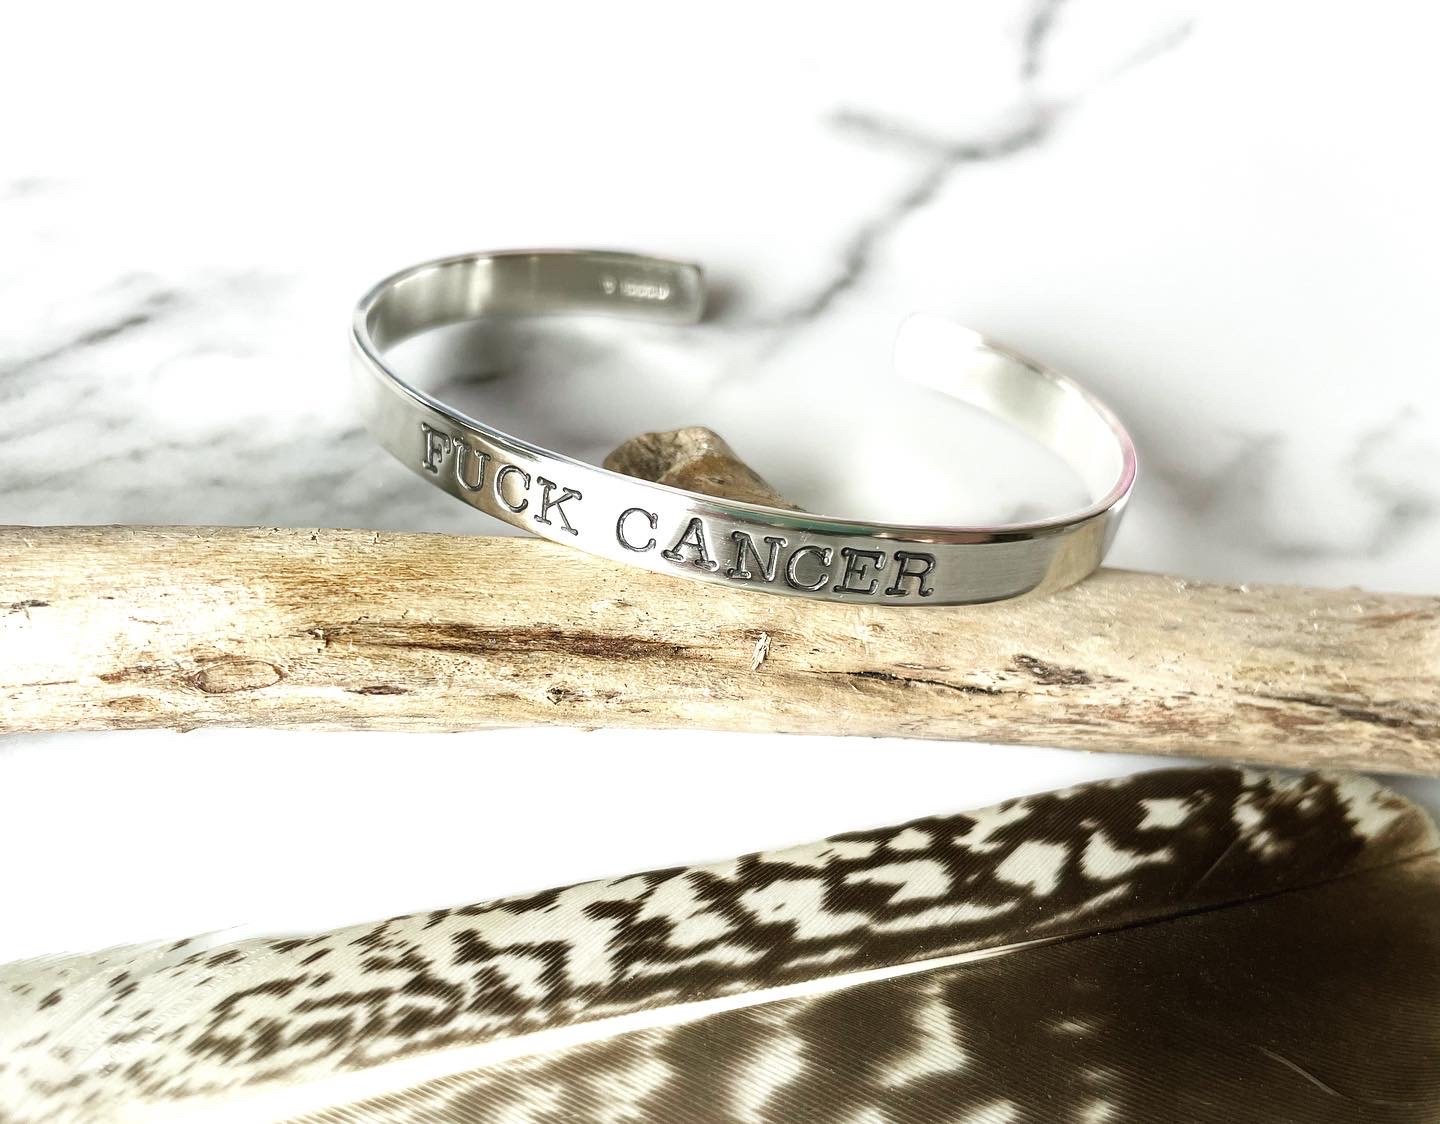 Image of Sterling Silver Cuff Bracelet 'FUCK CANCER'. Hand Stamped Silver Cuff F*ck Cancer 925